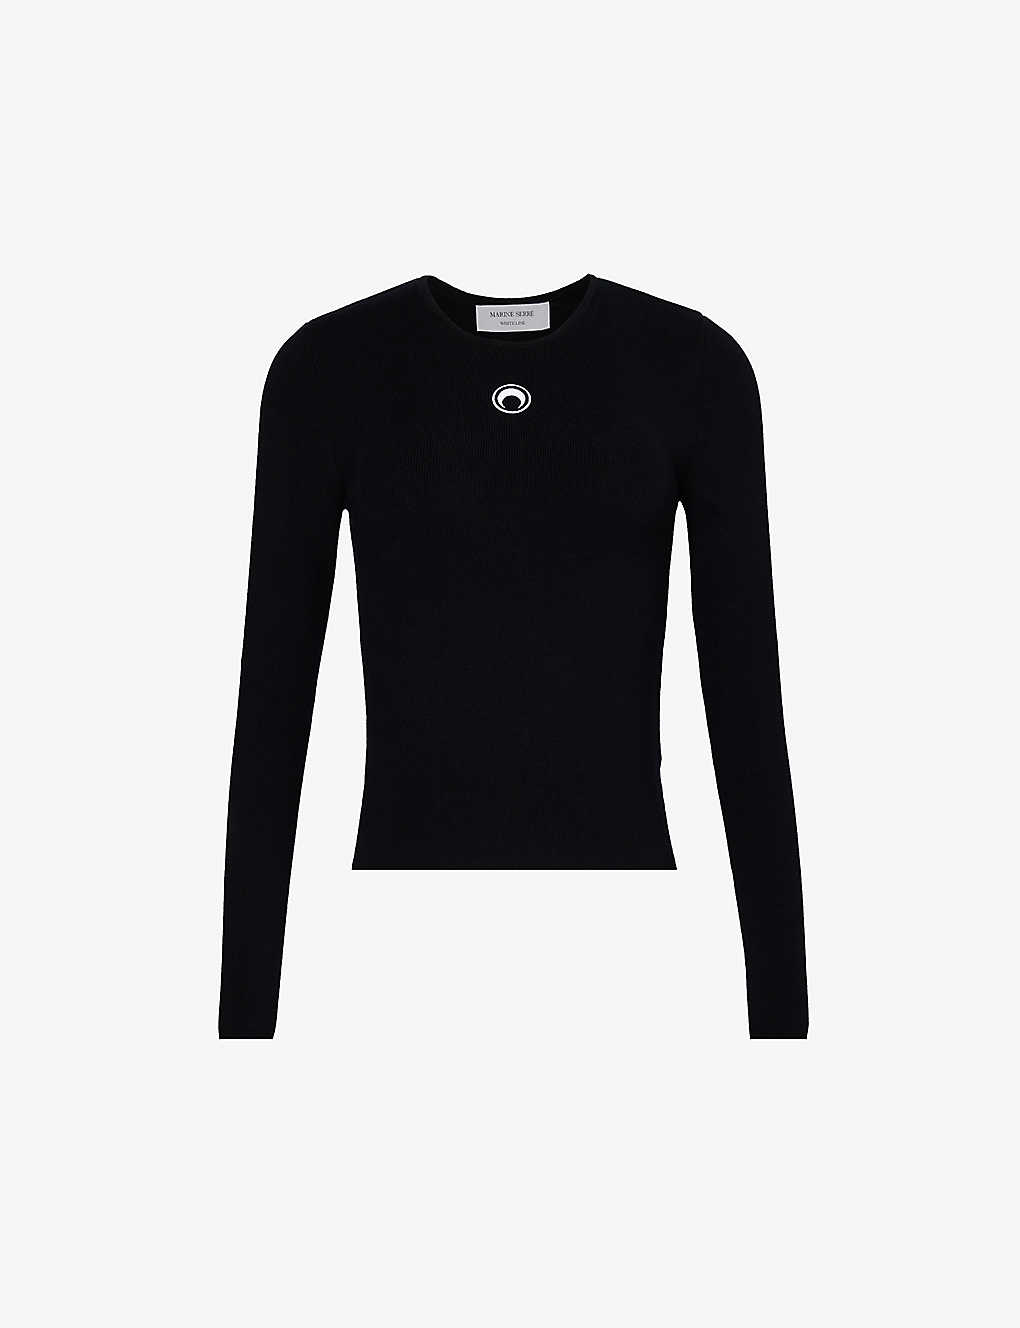 Shop Marine Serre Women's Black Moon-embroidered Long-sleeved Stretch-knit Top